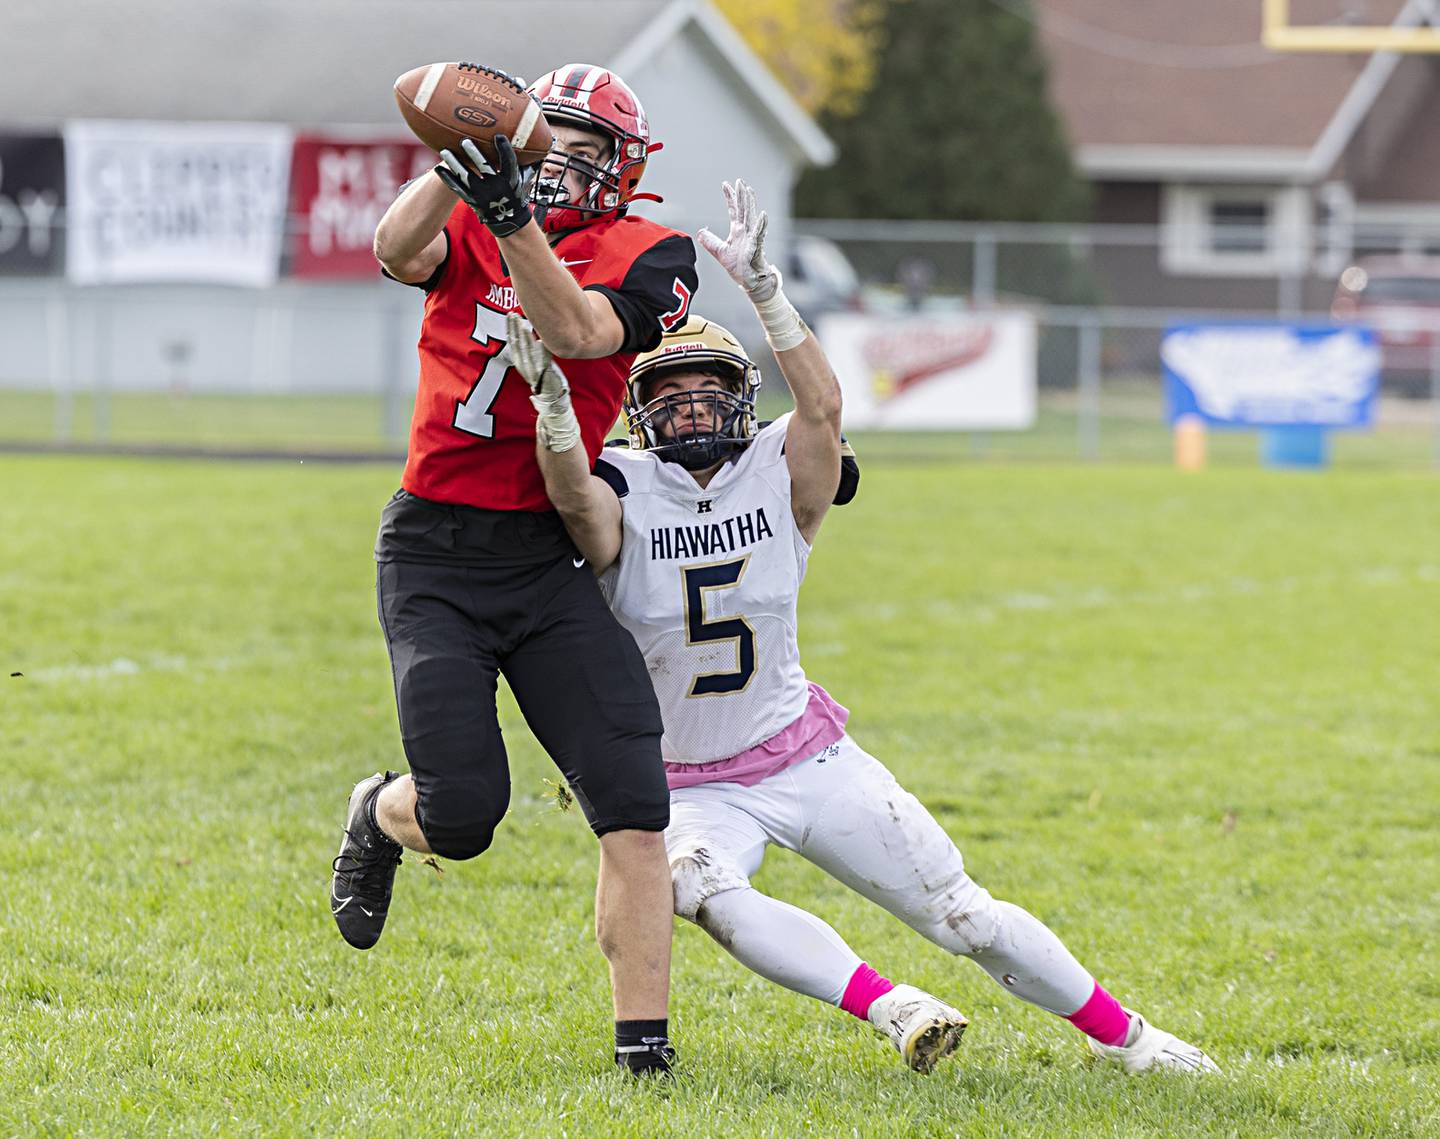 Amboy’s Troy Anderson snags an interception in front of Hiawatha’s Ryan Barber Saturday, Oct. 28, 2023 in the I8FA playoffs in Amboy.